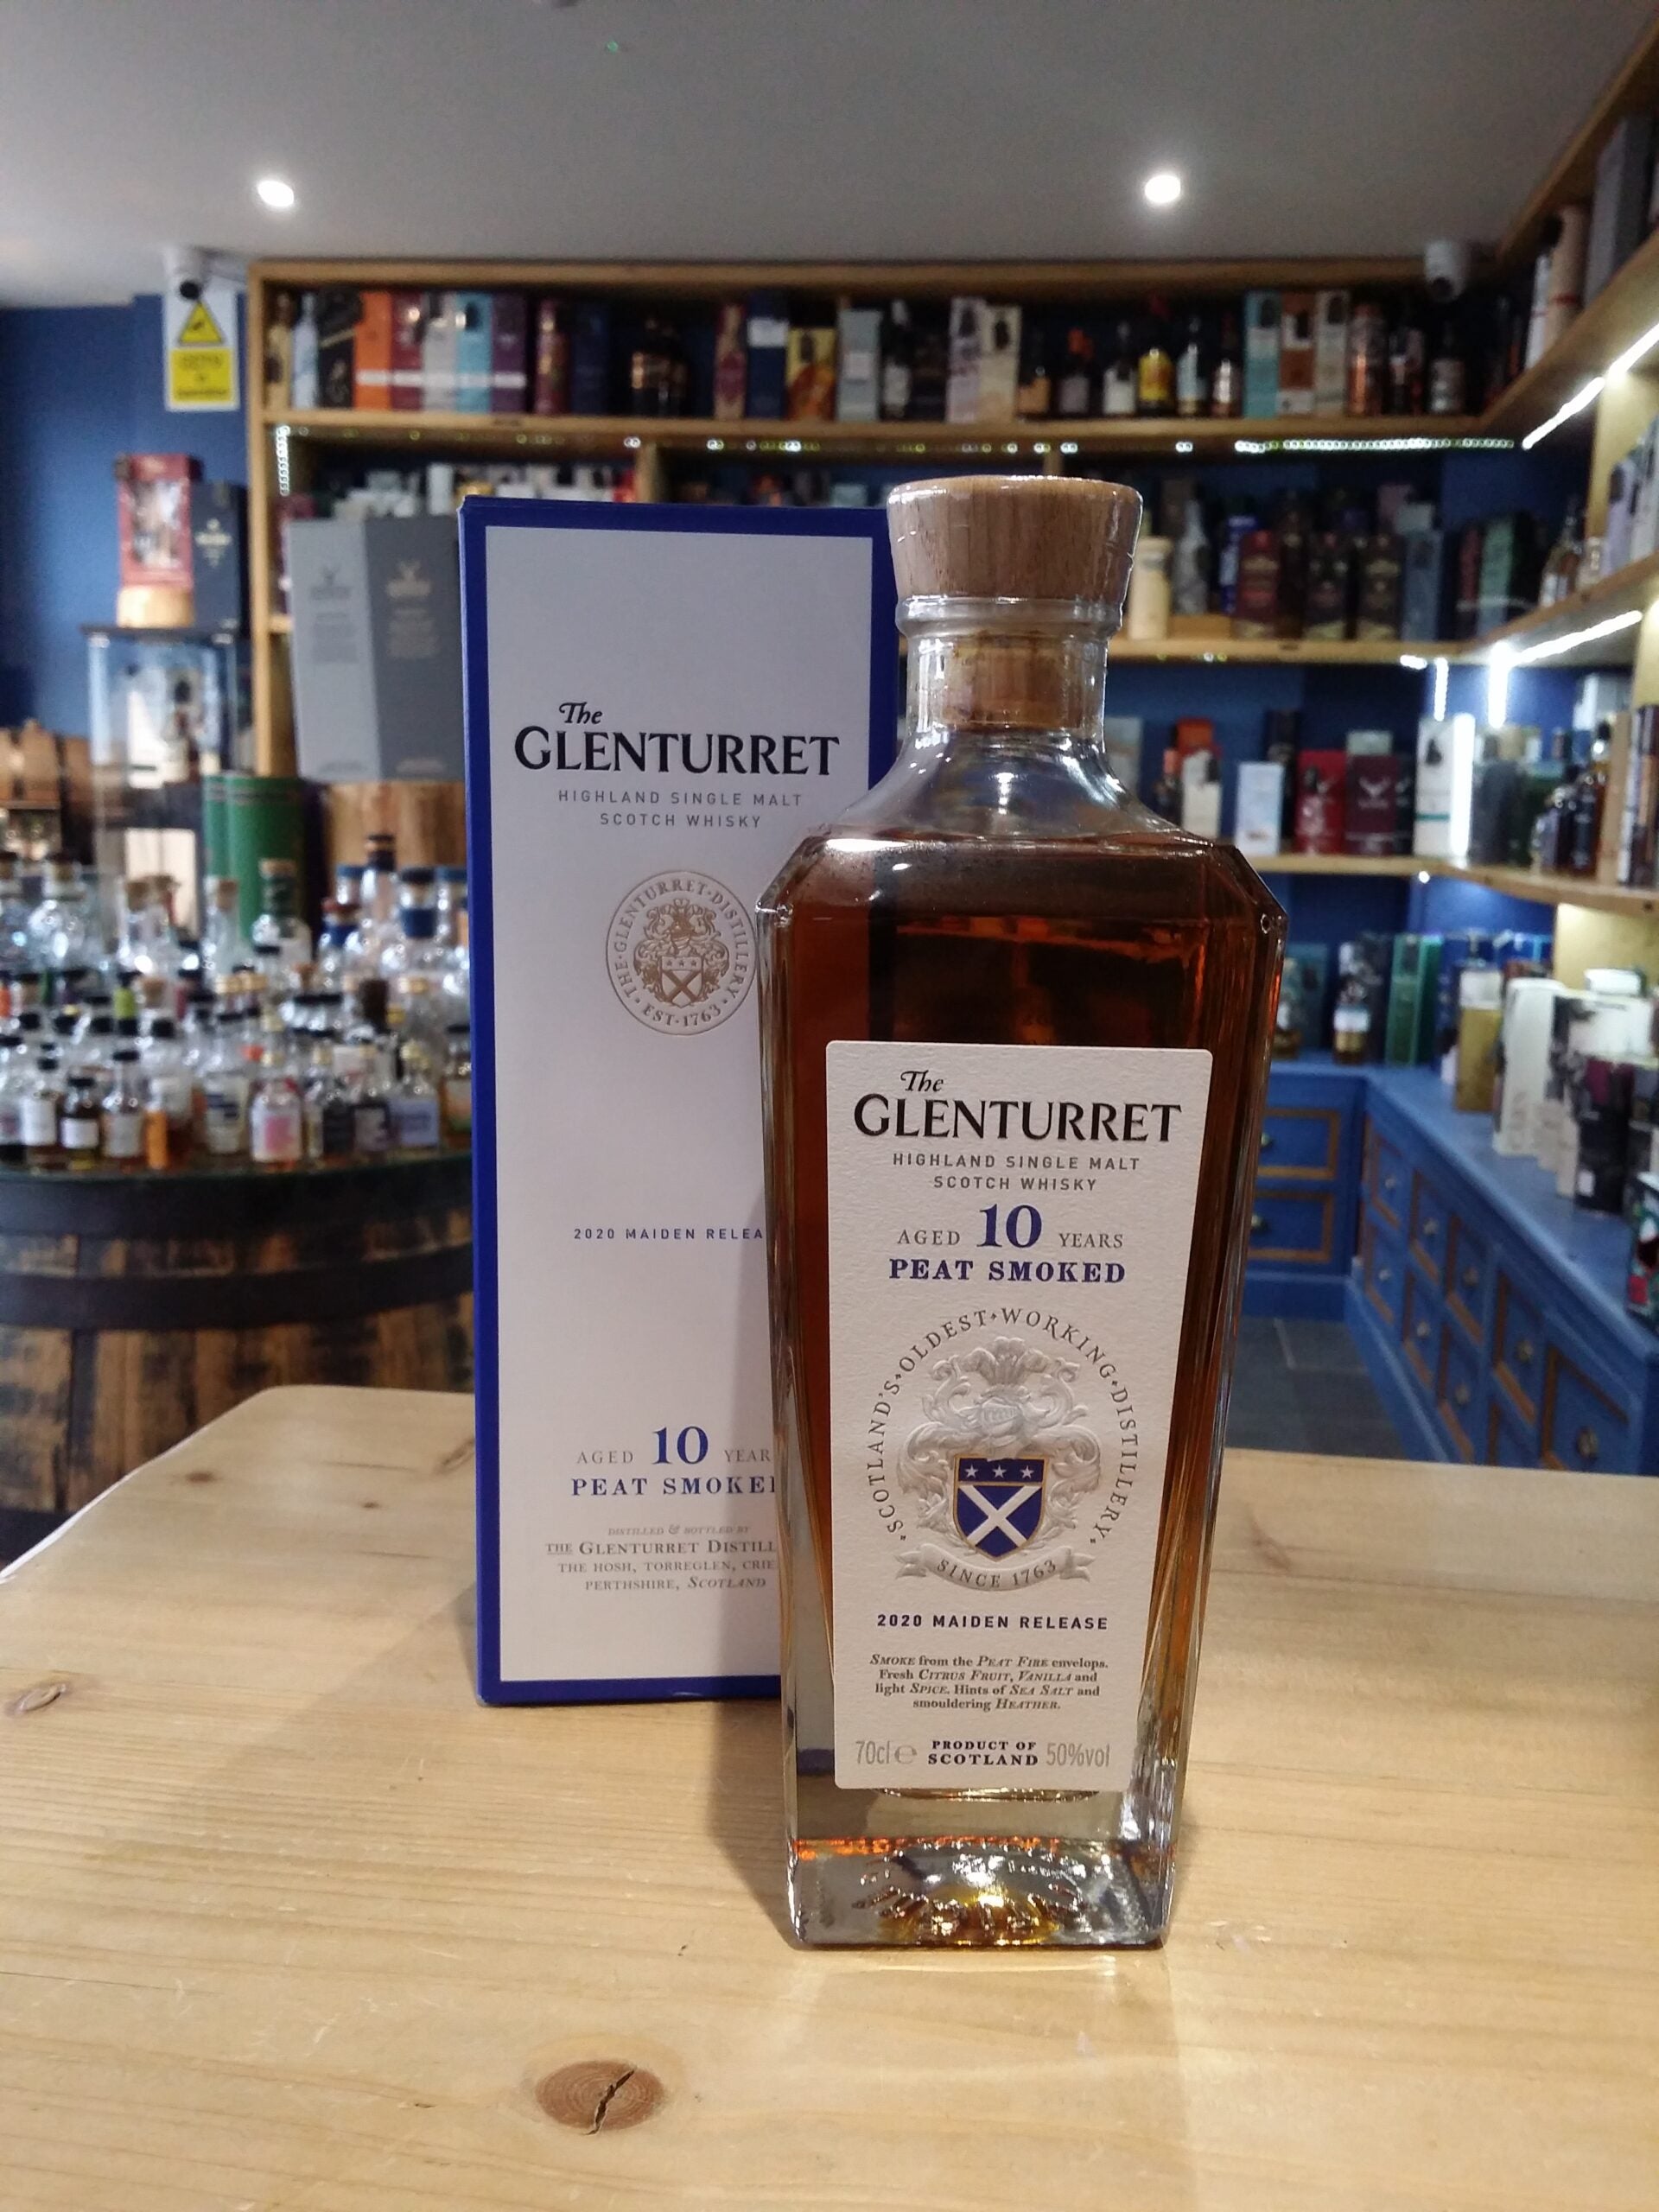 Glenturret Aged 10 Years Peat Smoked 2020 Maiden Release 70cl 50%